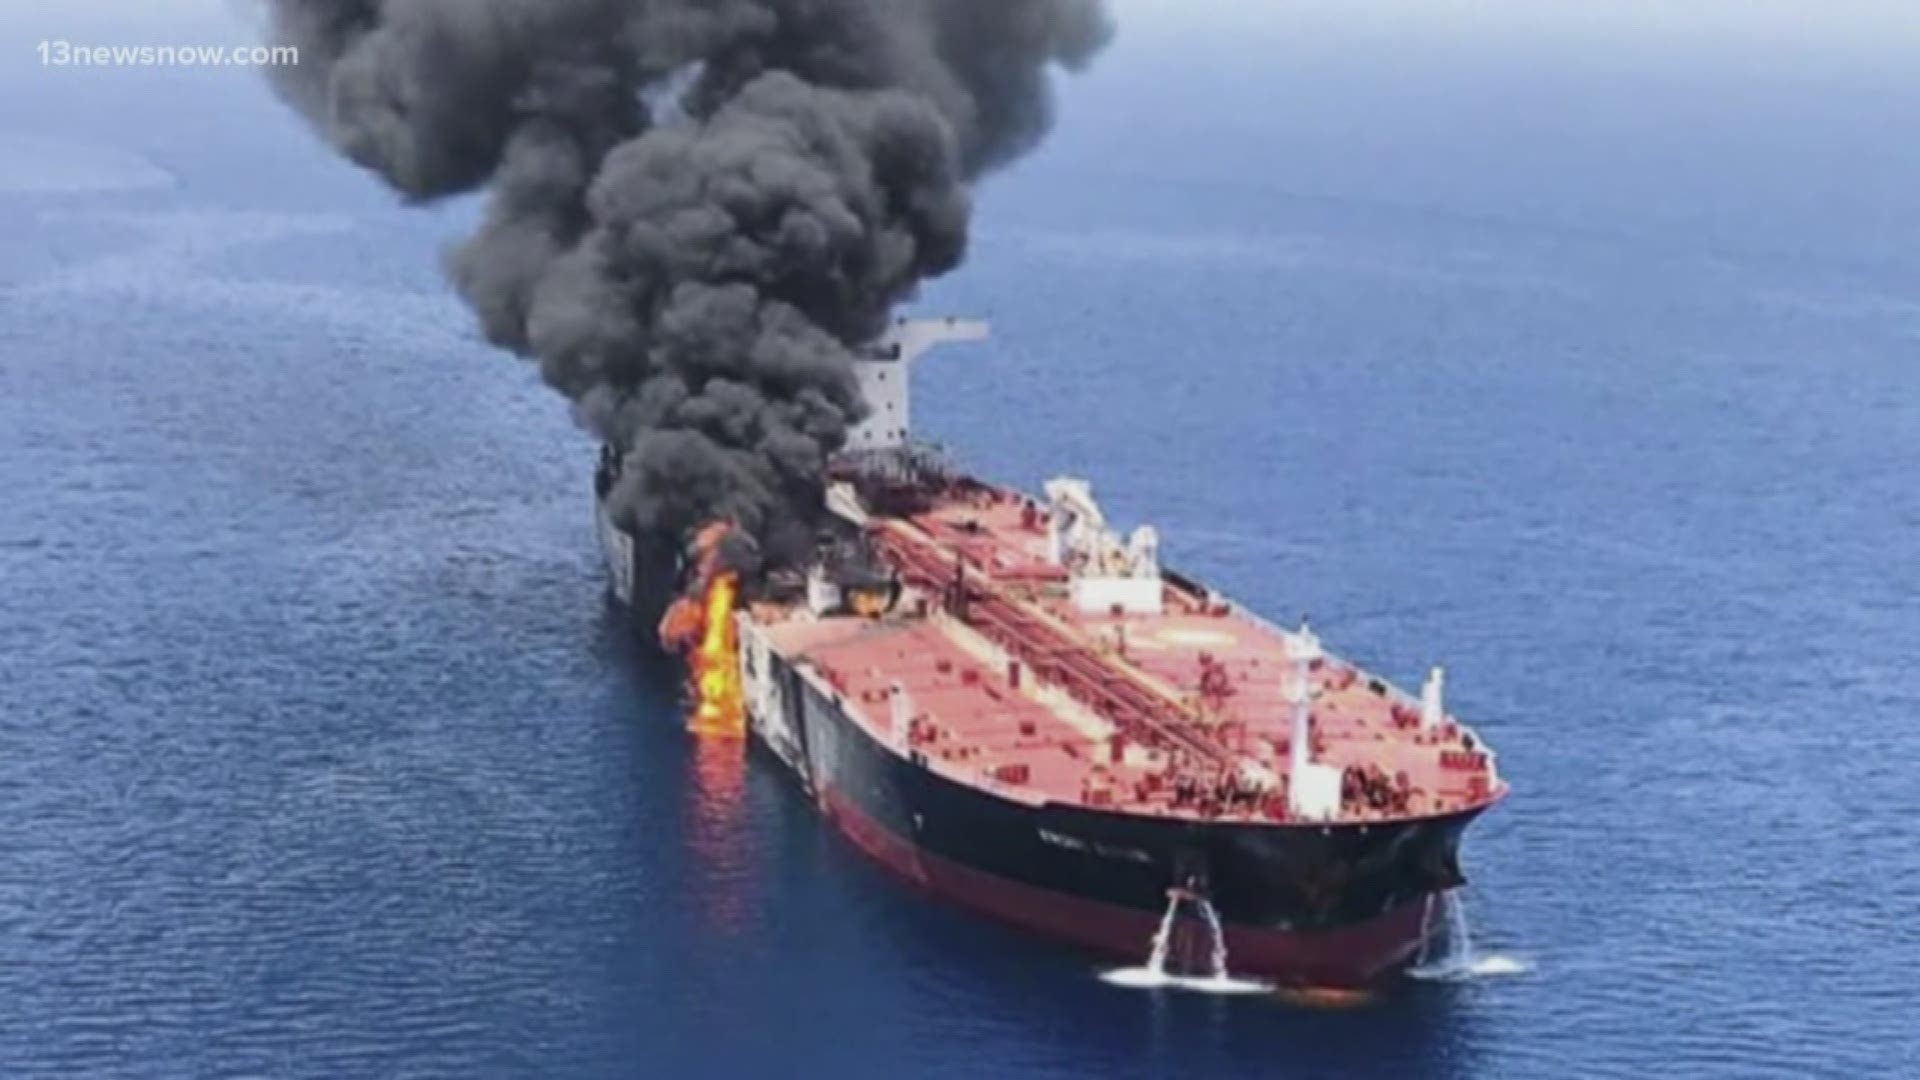 The Navy is helping dozens of sailors rescued from a burning oil tanker, off the coast of Oman.